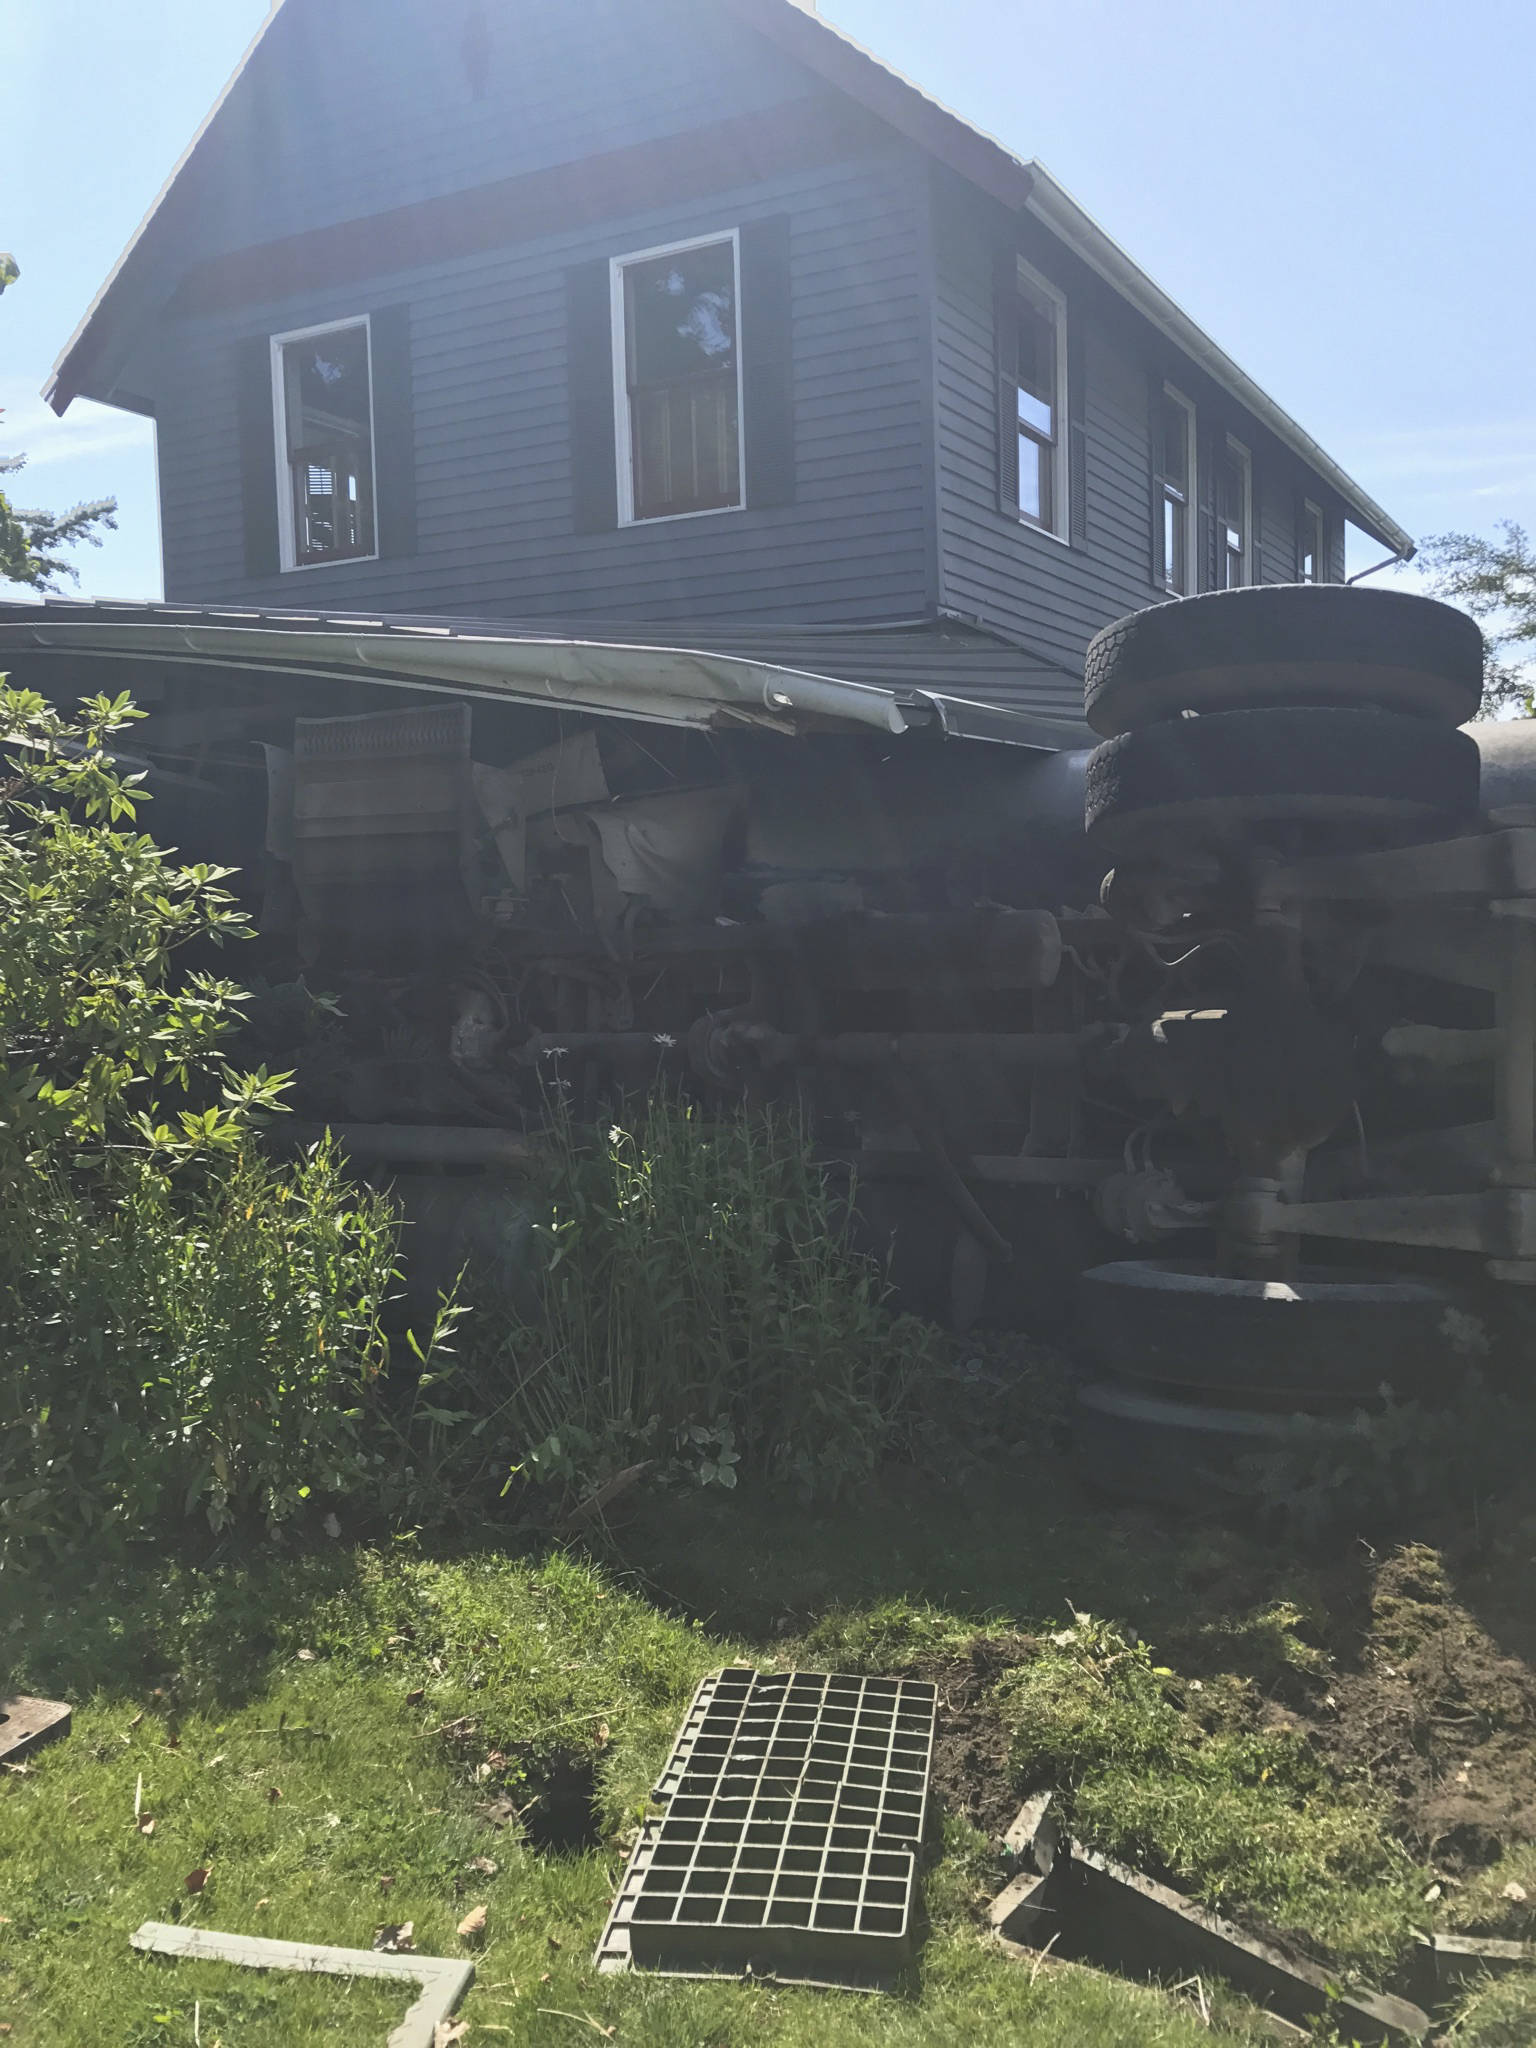 Dump truck crashes into house